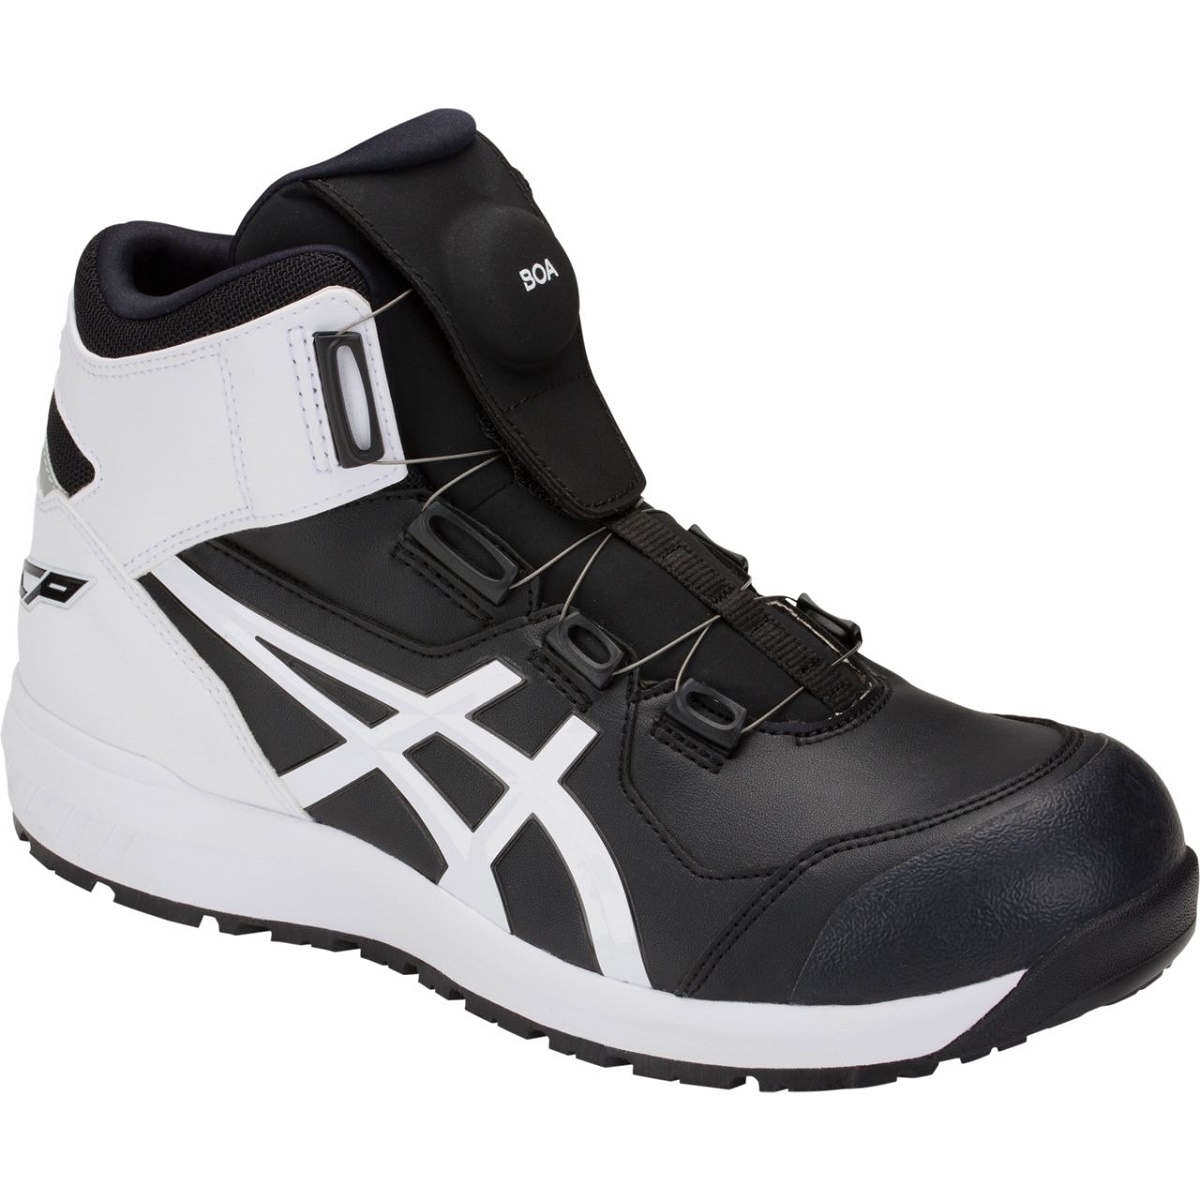 safety boots asics